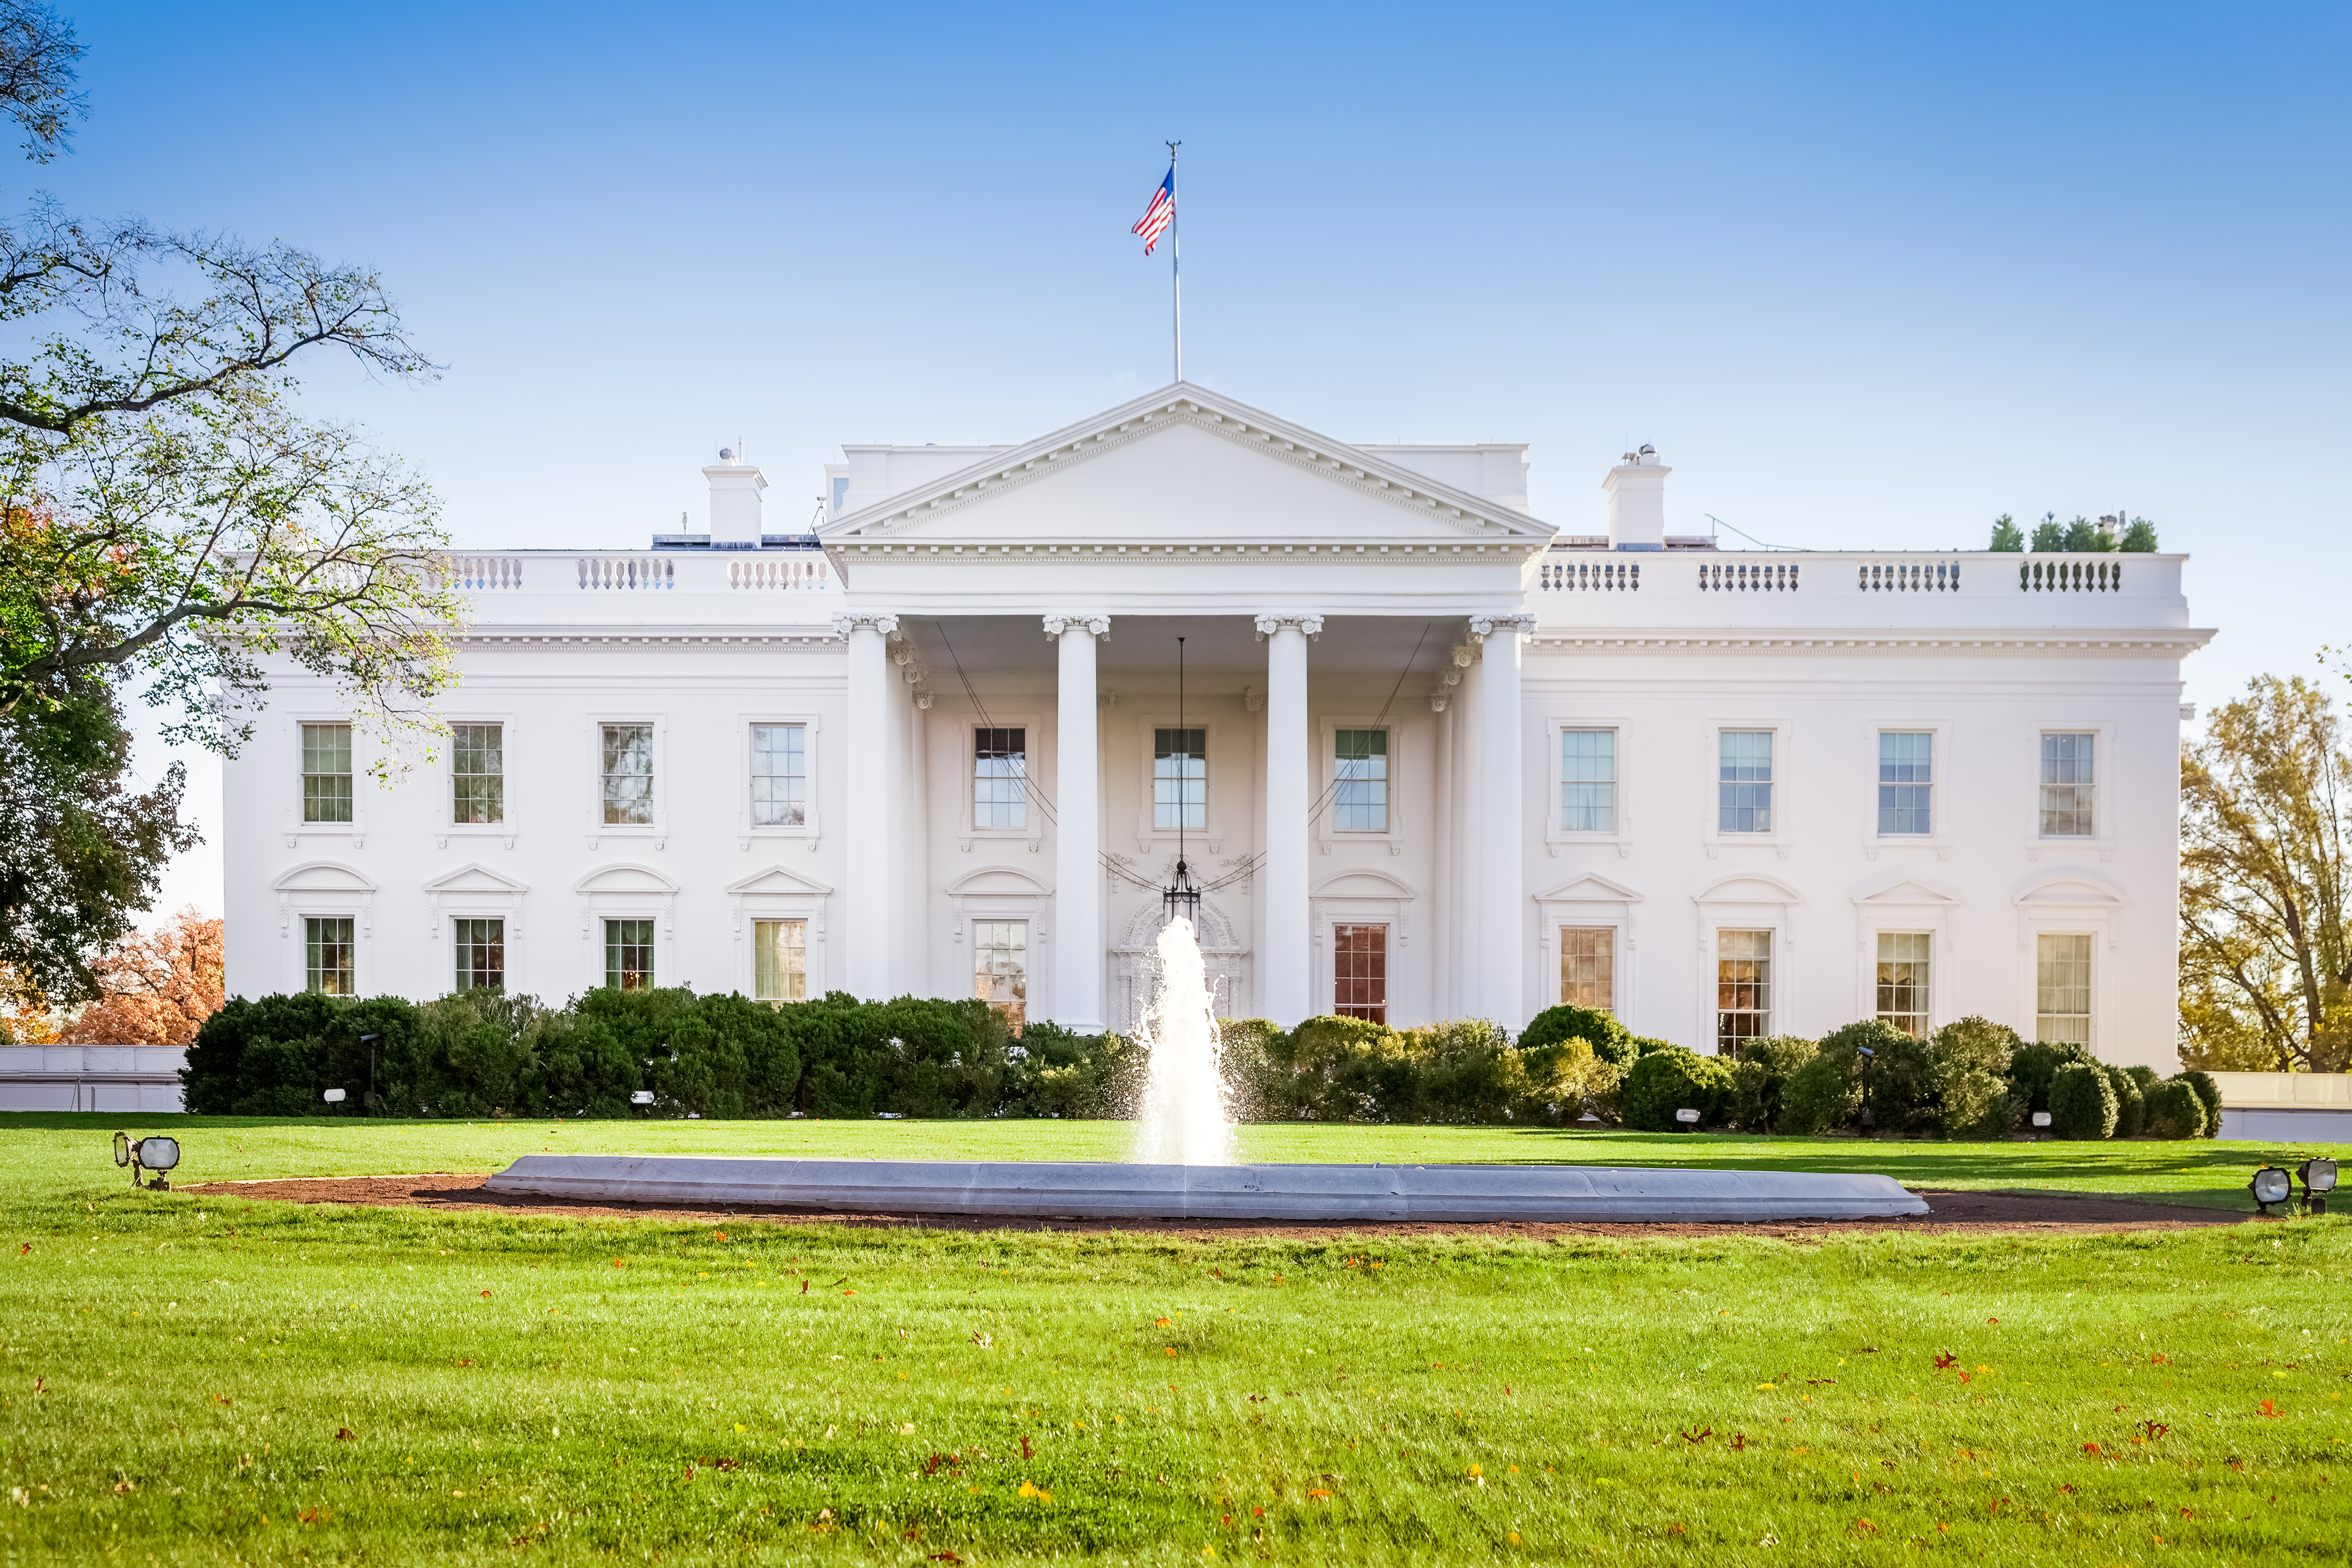 Image of the White House